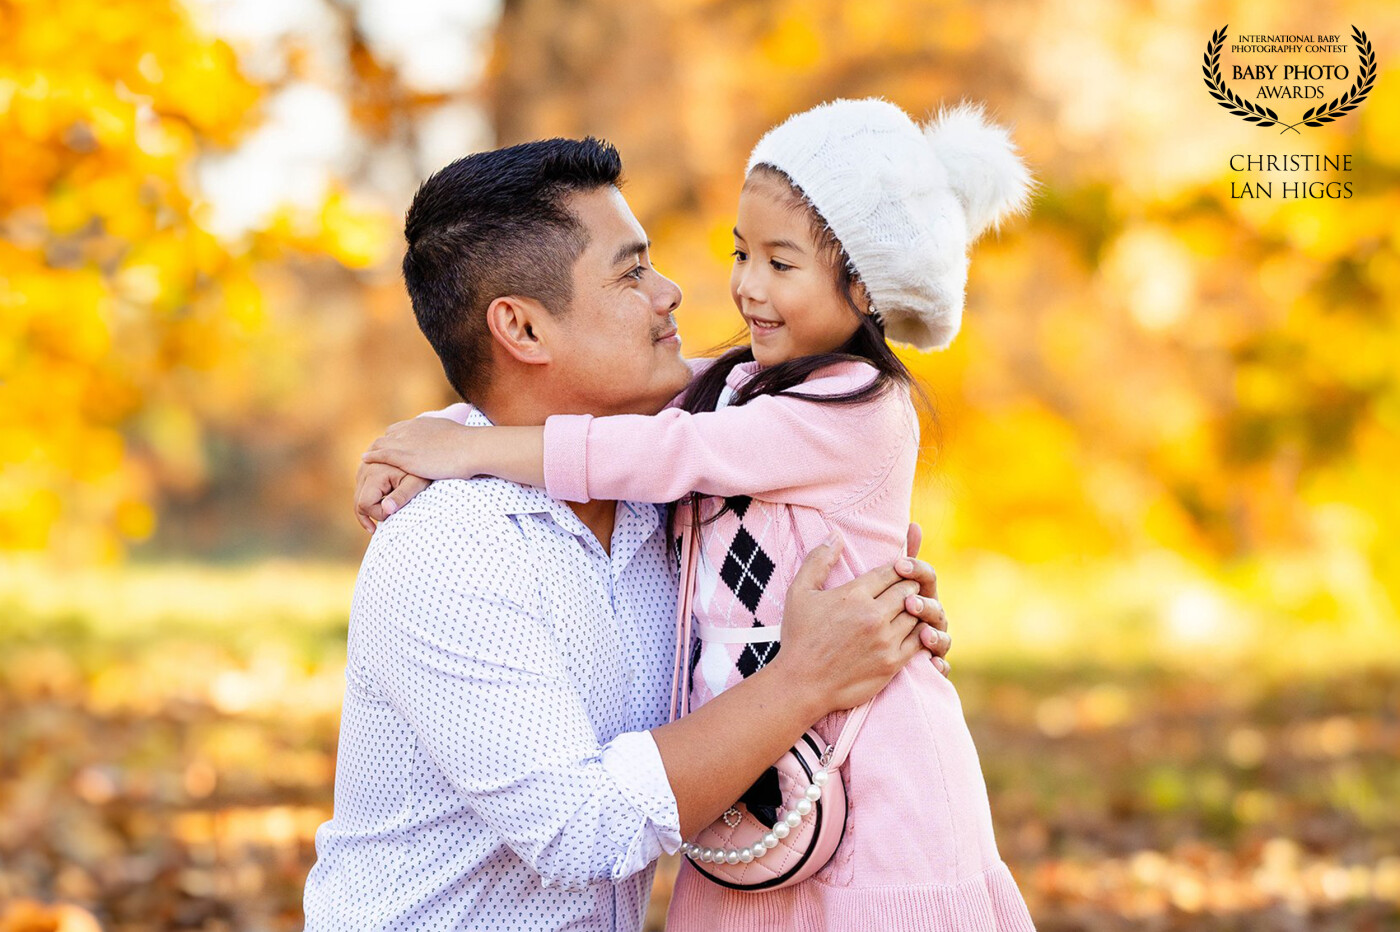 In this endearing moment, a father and his  daughter exchange heartfelt smiles, embodying the warmth and joy of their special connection.